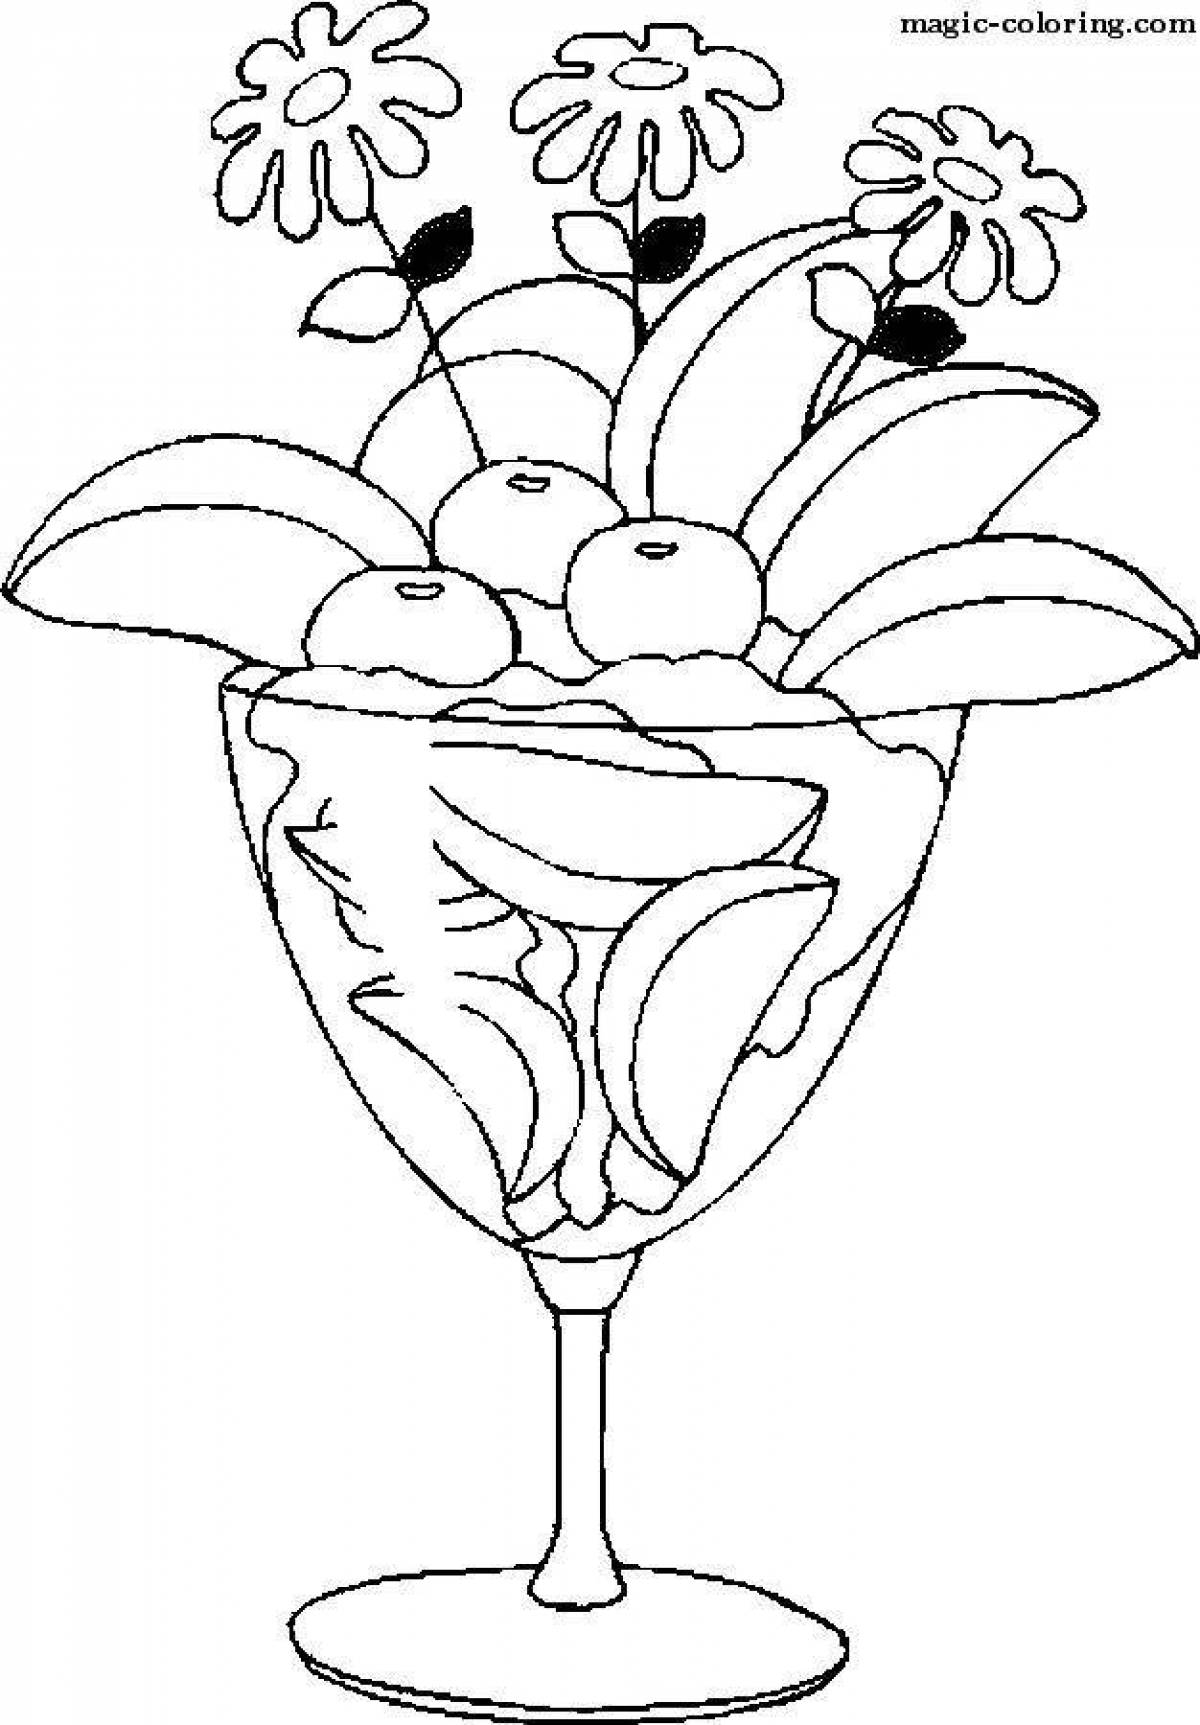 Tempting fruit salad coloring page